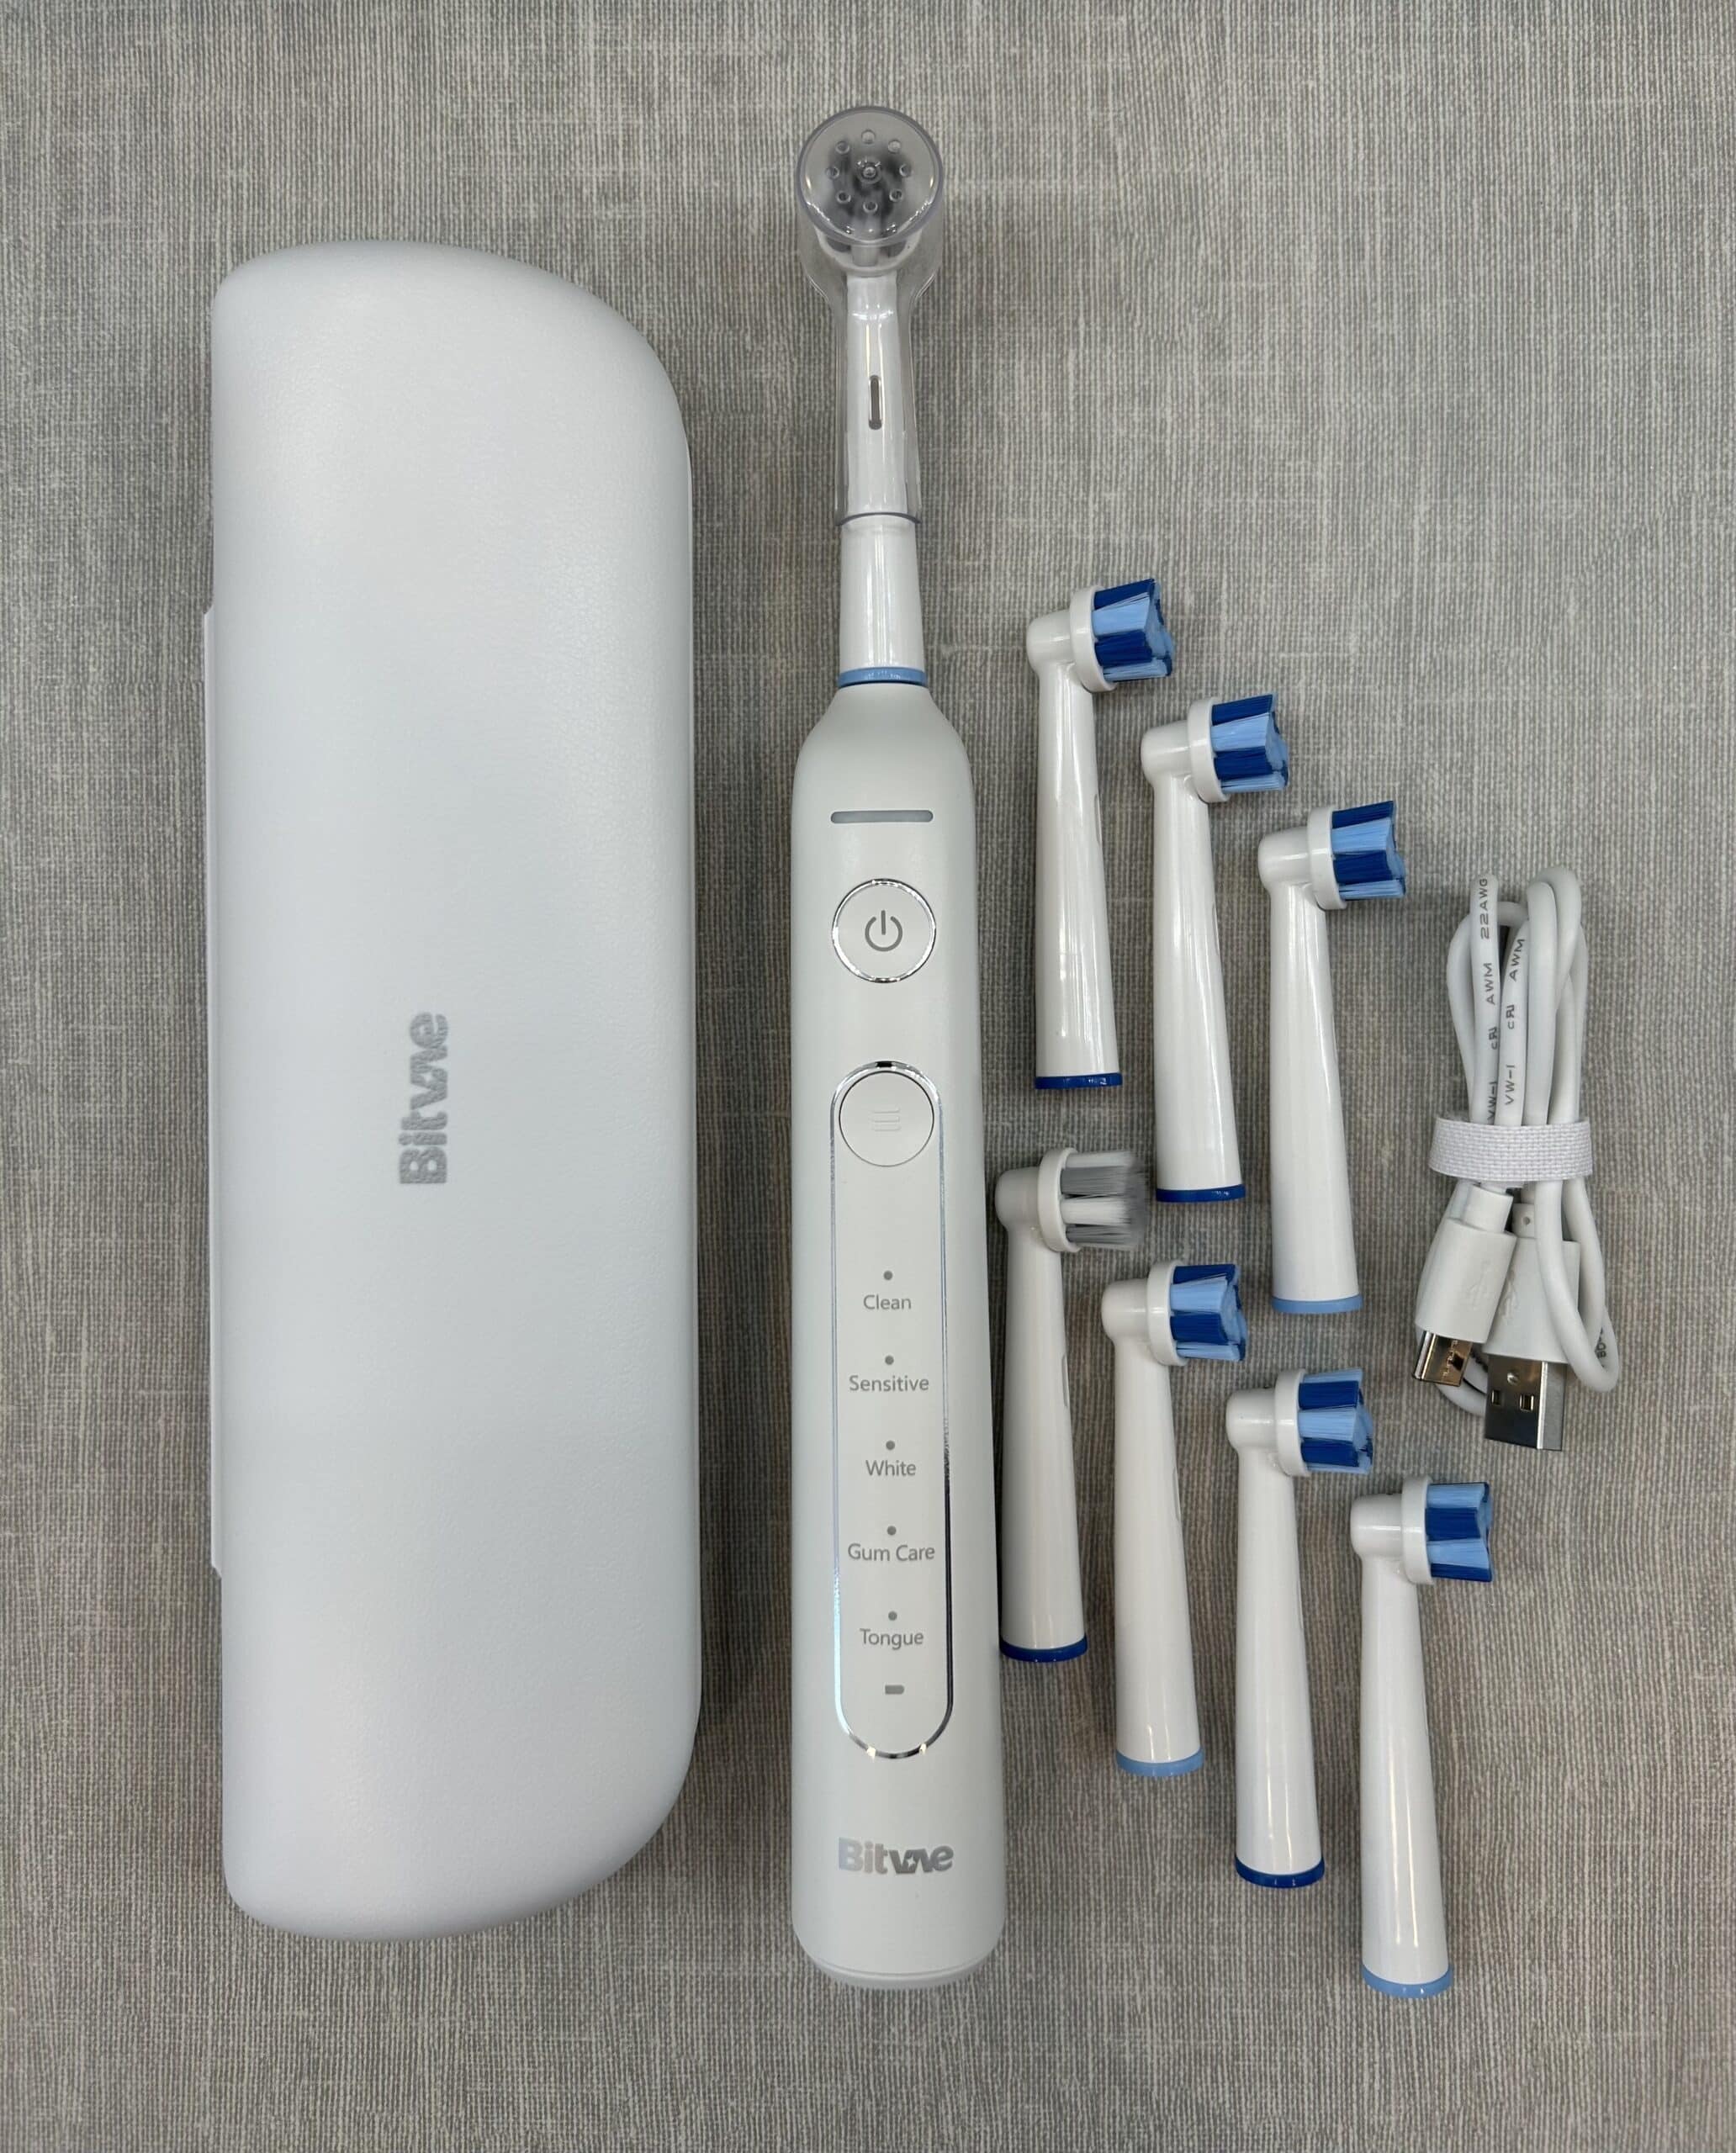 Bitvae R2 Rotating Electric Toothbrush Review | My Dental Advocate